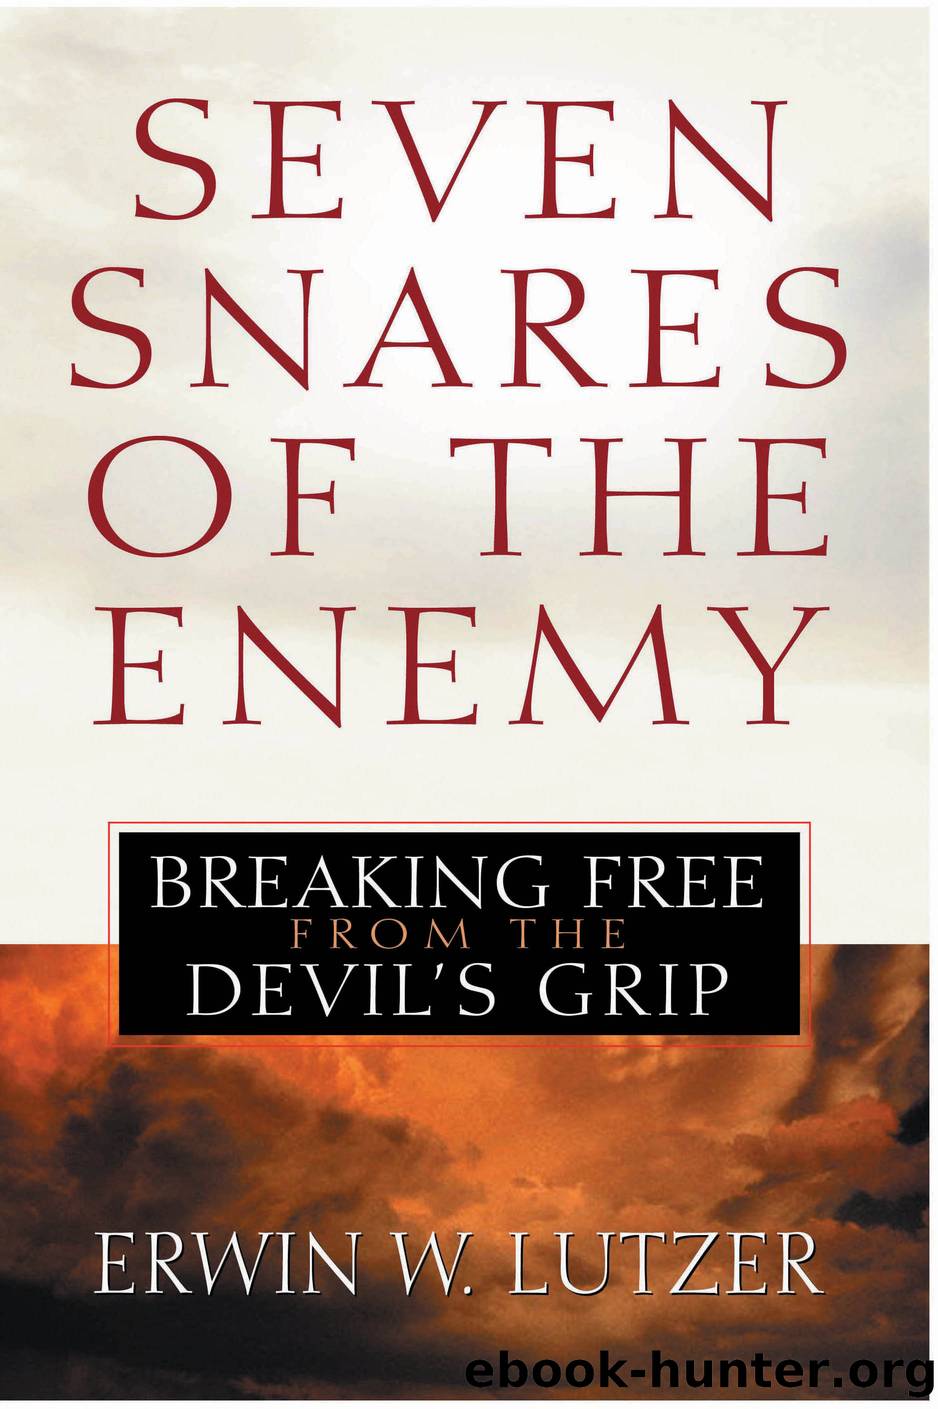 Seven Snares of the Enemy by Erwin W. Lutzer